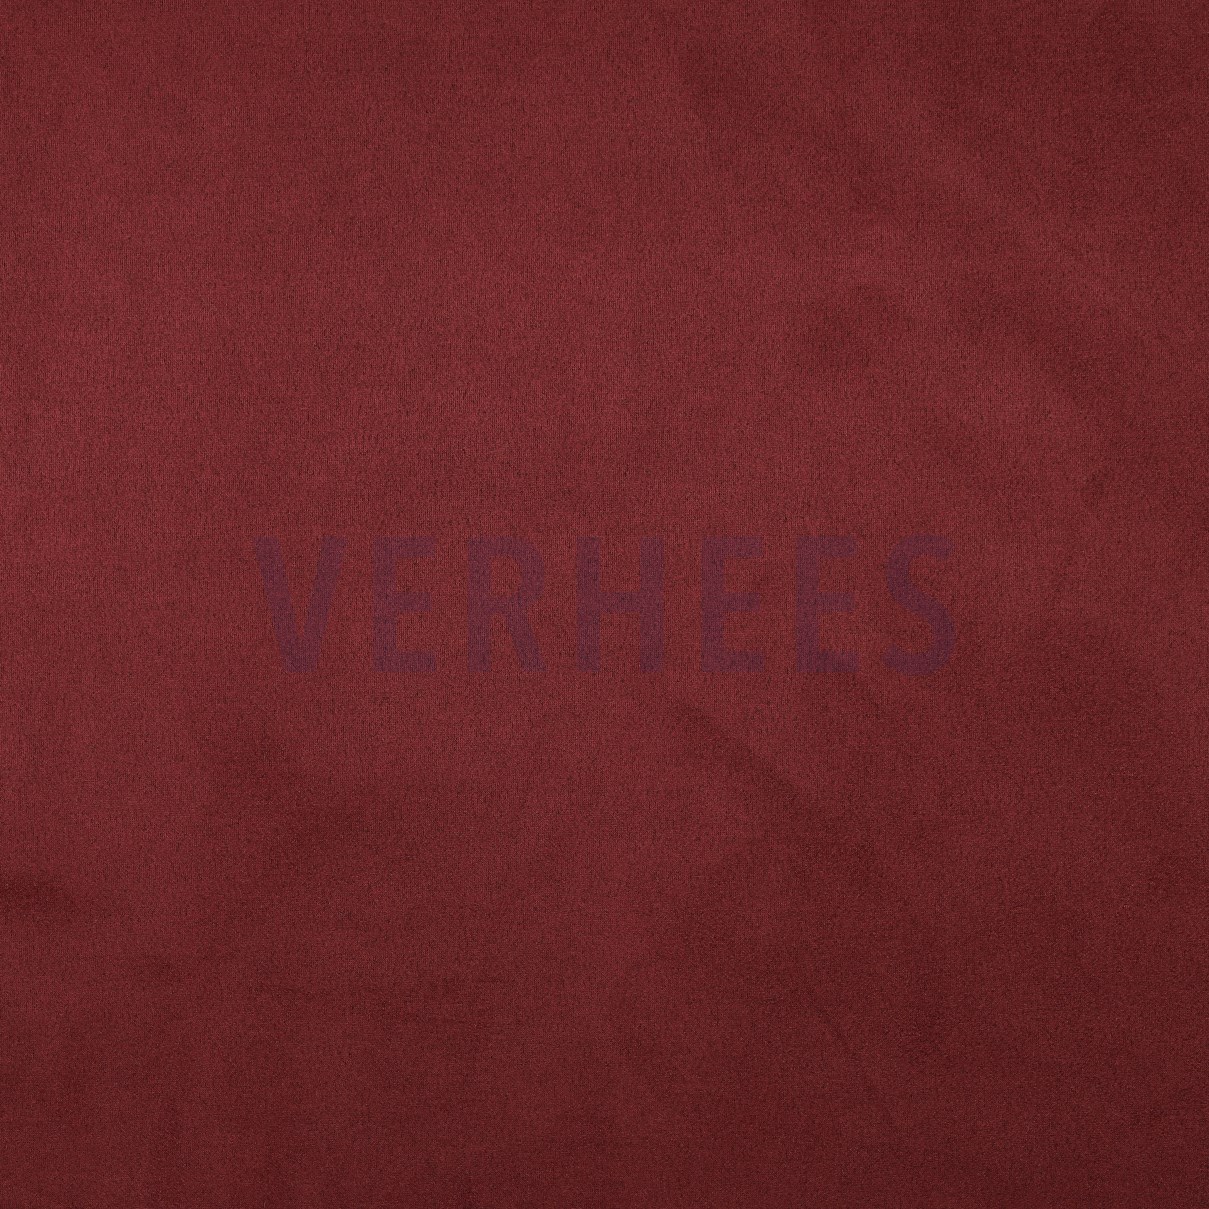 SUEDE STRETCH BORDEAUX (high resolution)